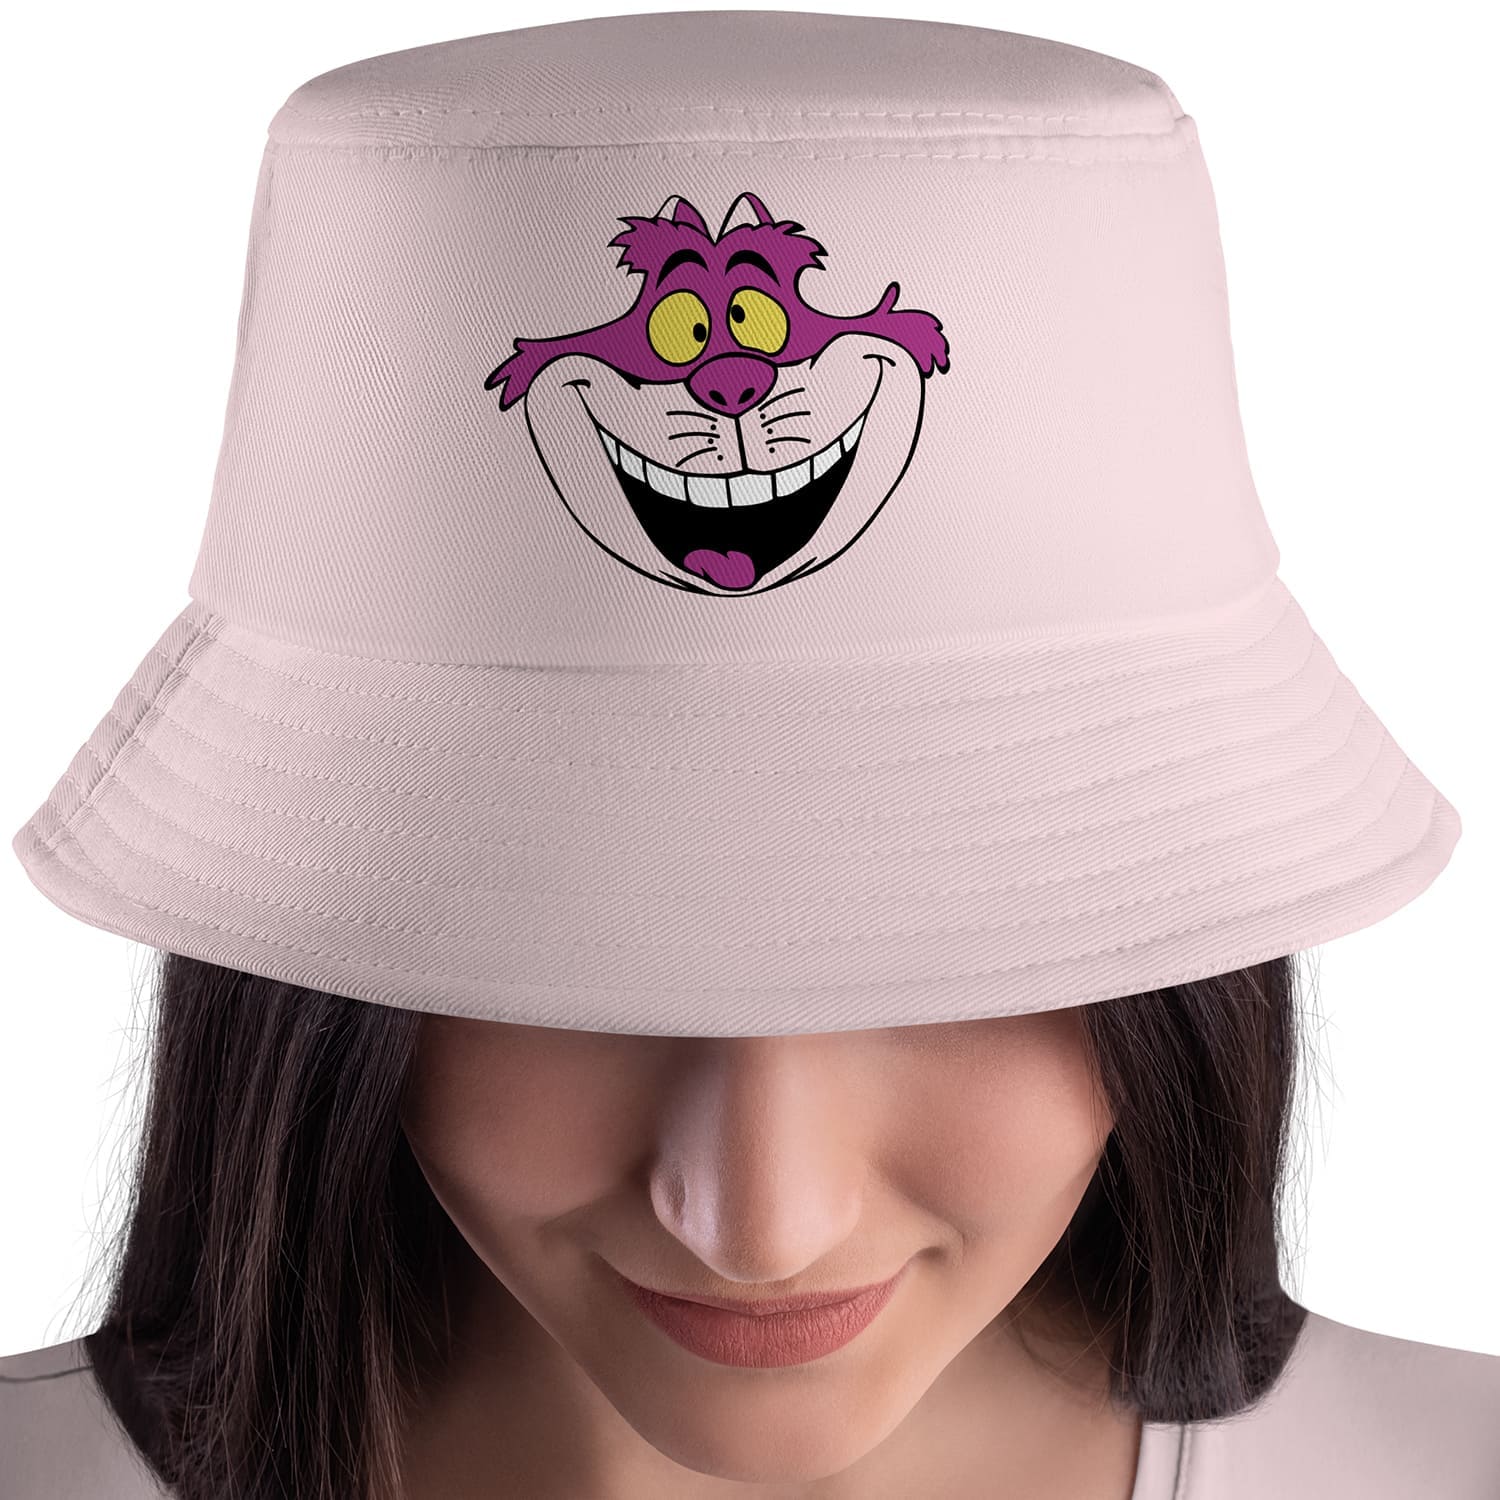 Woman wearing a pink hat with a goofy face on it.